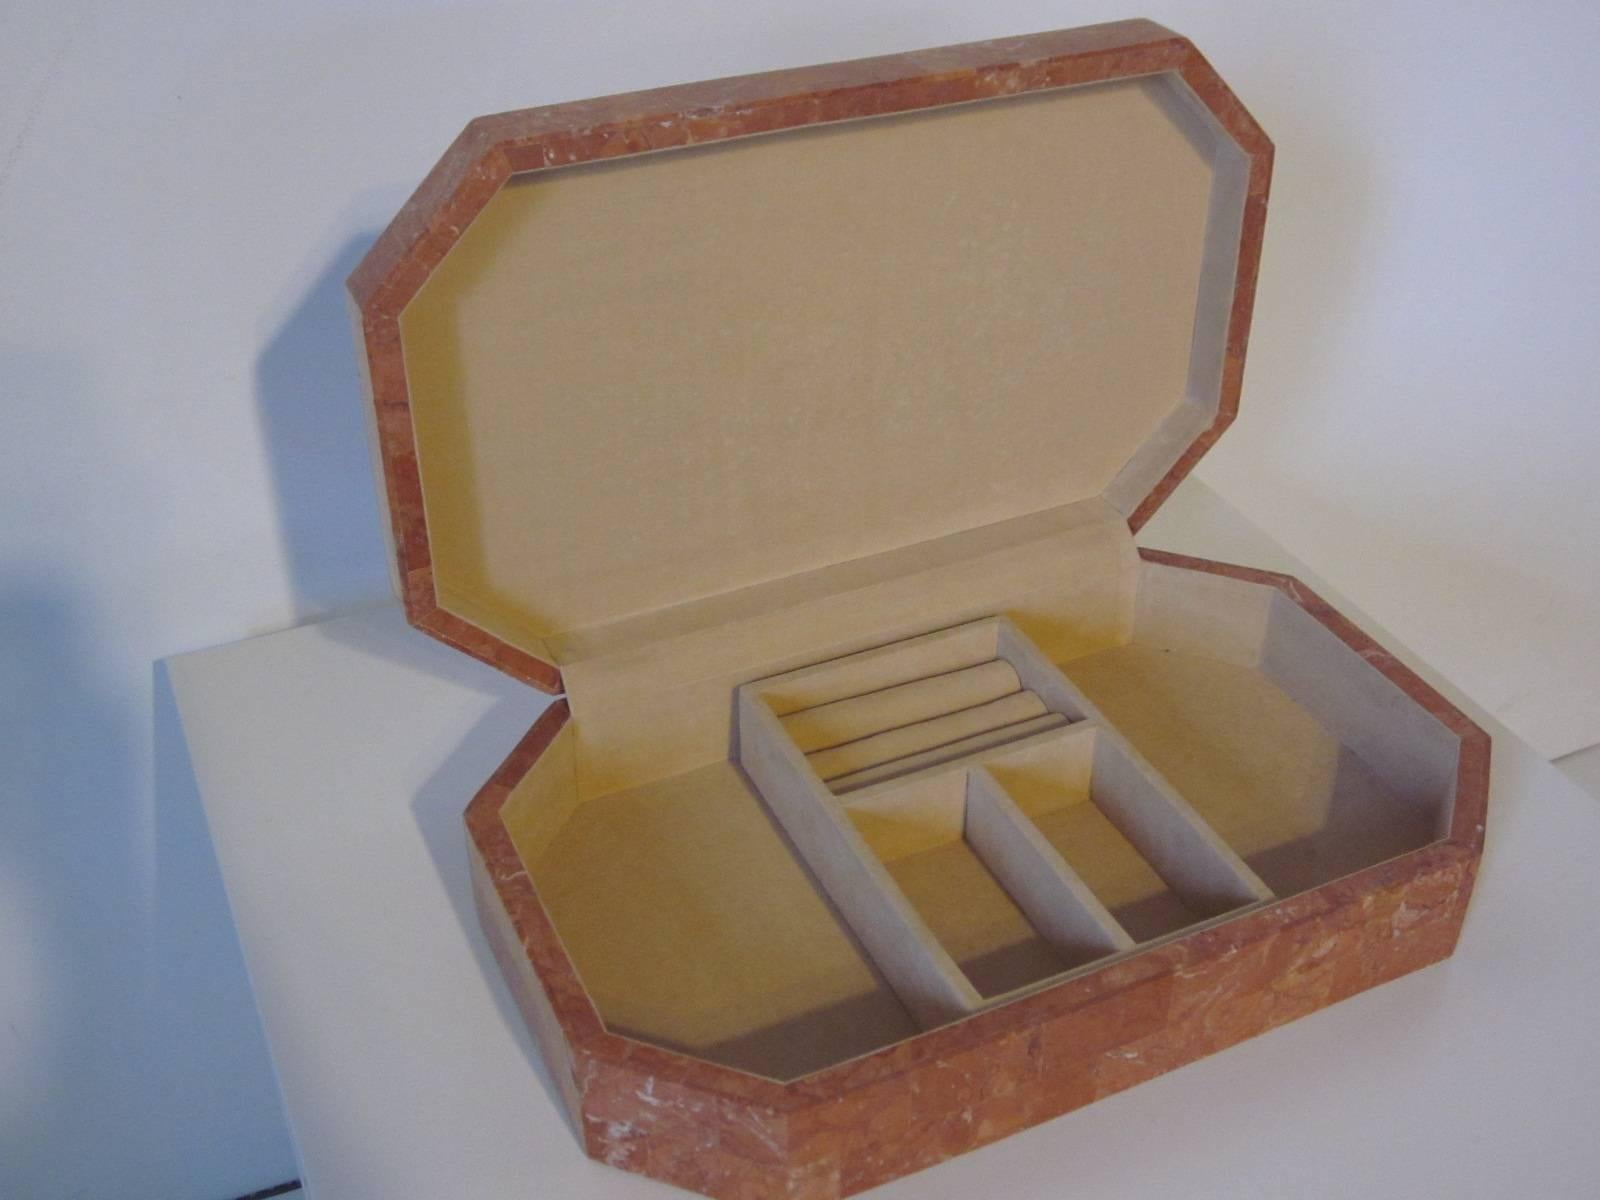 A tessellated marble jewelry box crafted by Maitland Smith in the style of Karl Springer with hinged top, velvet lining and contains a removable small item tray.